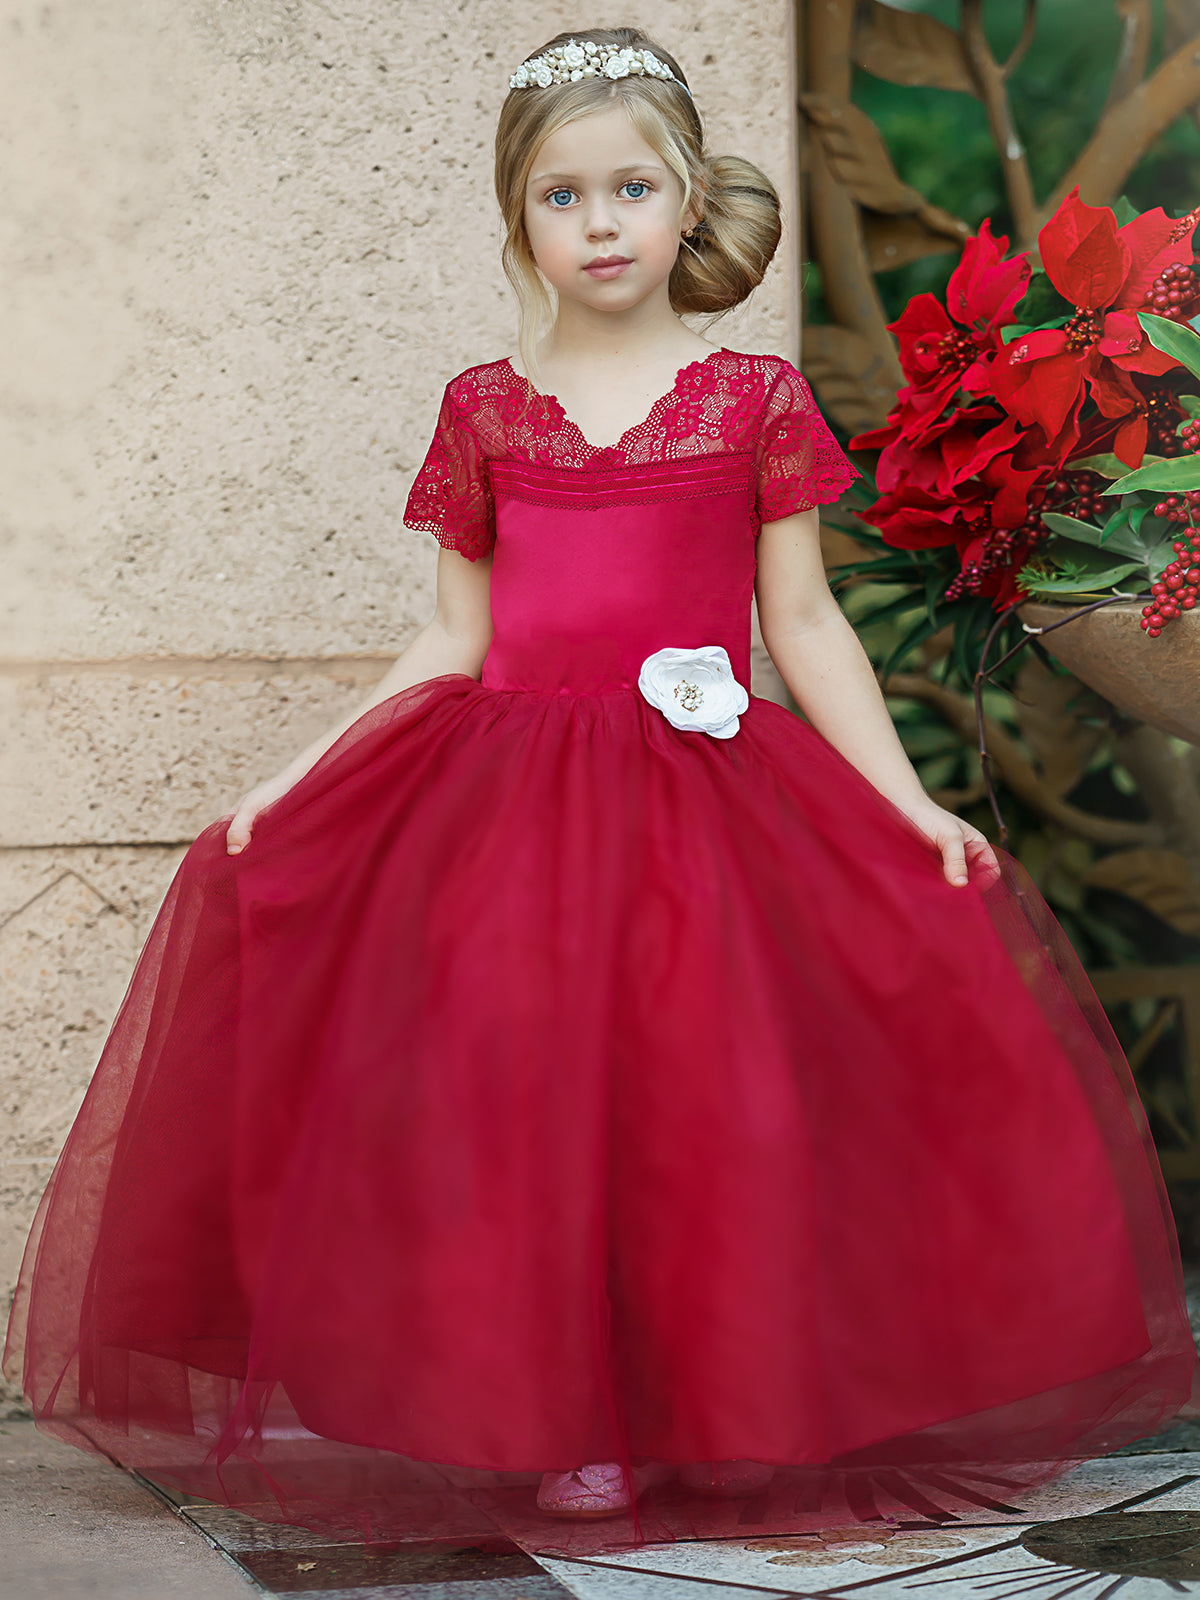 Girls Winter Formal Dress | Lace Sleeve Special Occasion Holiday Gown